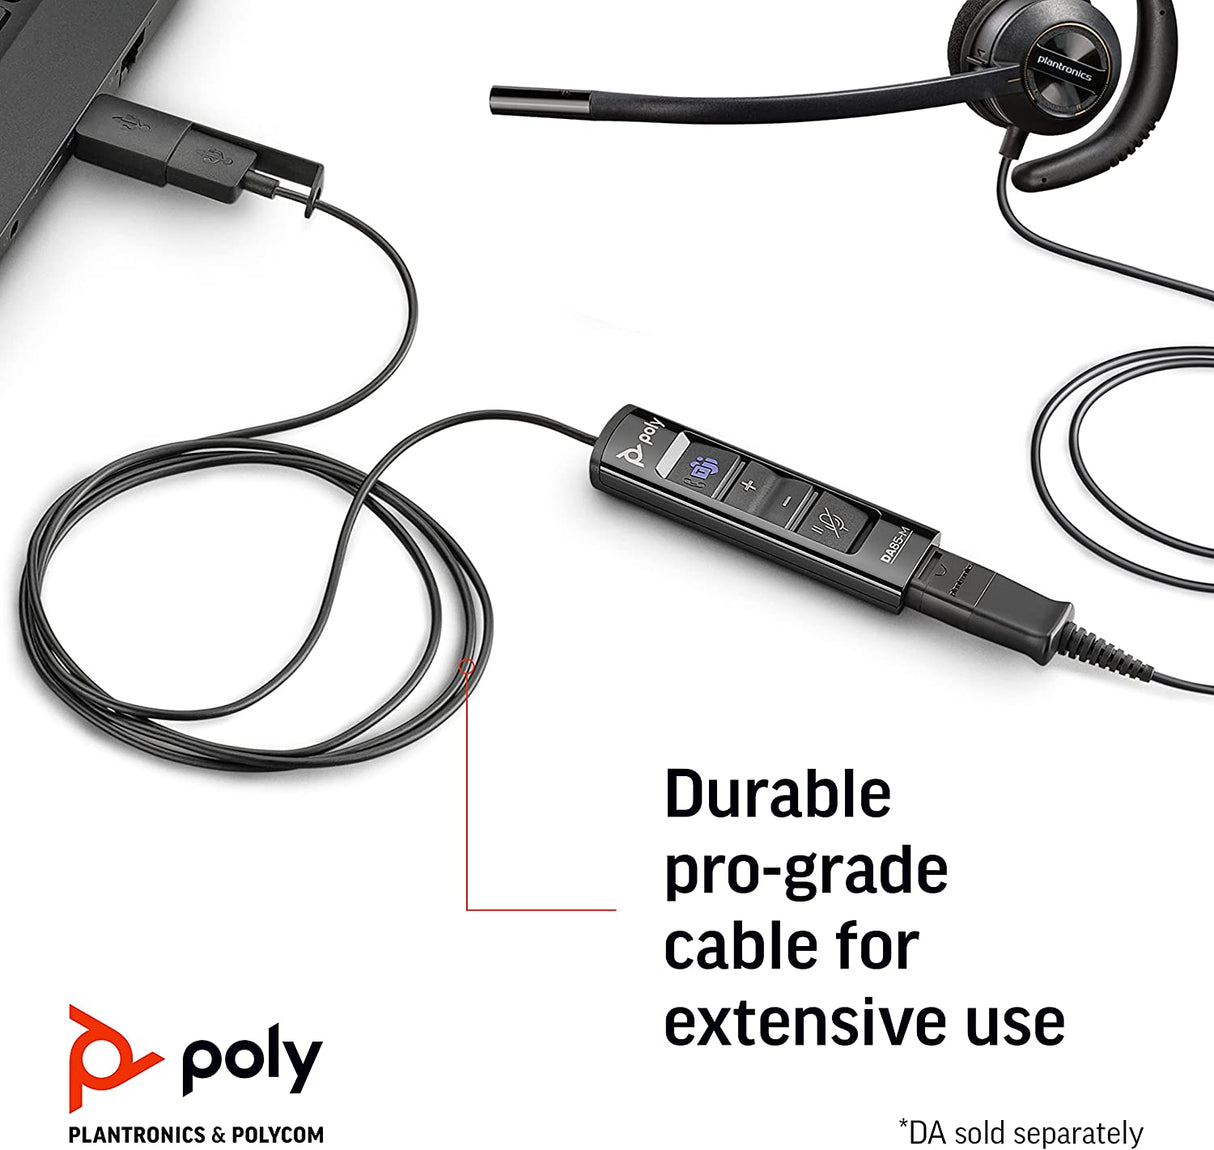 Poly - EncorePro 530 Quick Disconnect (QD) Headset (Plantronics) - Works with Poly Call Center Digital Adapters (Sold Separately) - Acoustic Hearing Protection - Over-the-Ear Wearing Style